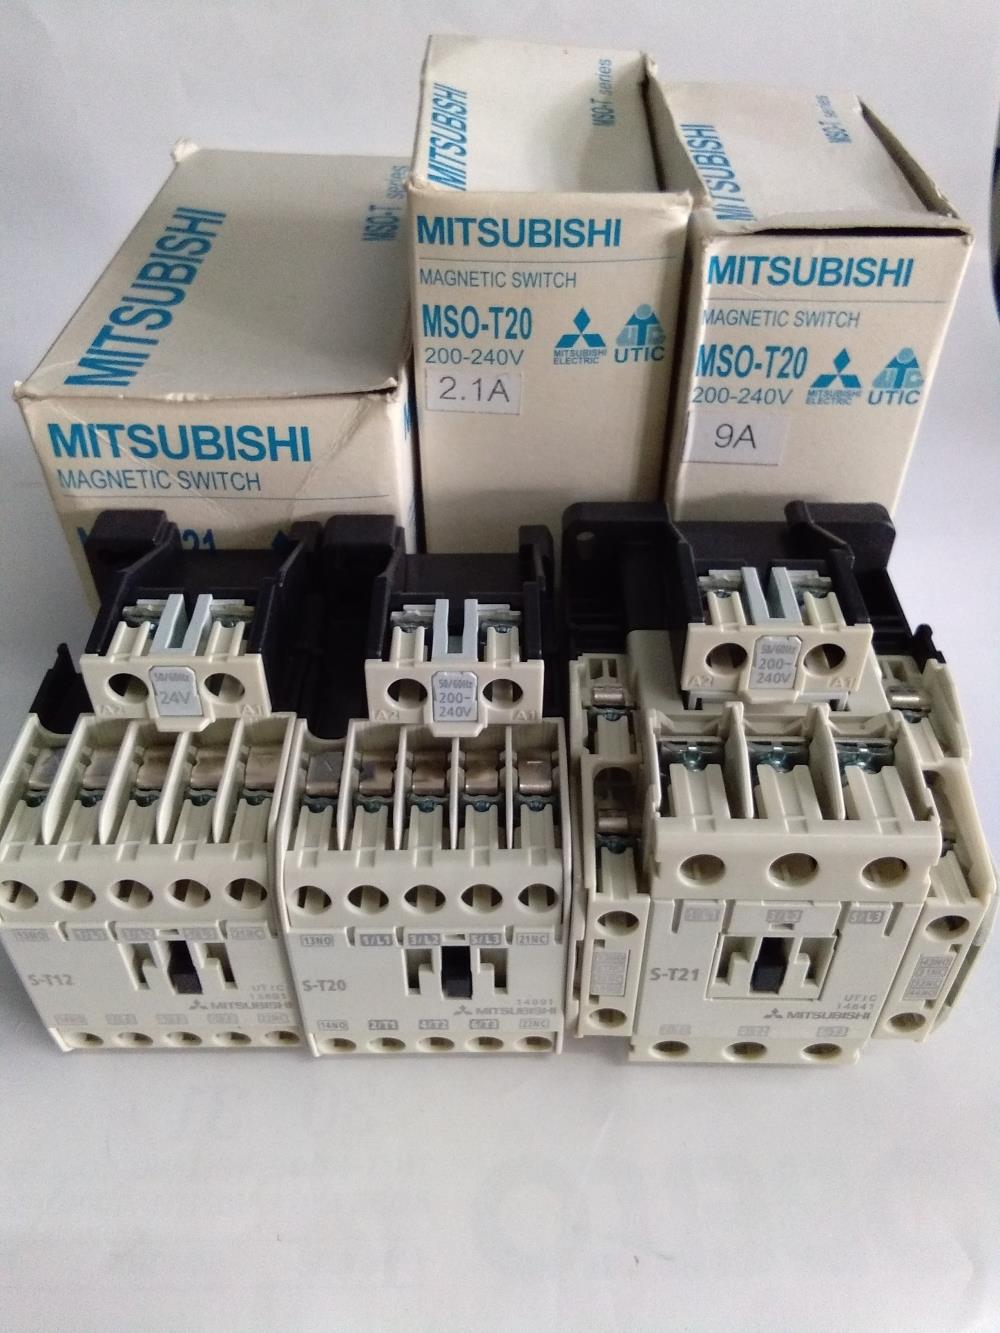 MITSUBISHI : CONTACTOR : S-T10 , S-T20 , S-T..**รุ่นใหม่ มีหลายรุ่น**,นครราชสีมา  mitsubishi magnetic contactor แมกเนติค โอเวอร์โหลด S-T10 S-T12 S-T20 S-T25- S-T35 S-T50 S-T65 S-T80 S-T95 โคราช,,Electrical and Power Generation/Electrical Components/Contactor